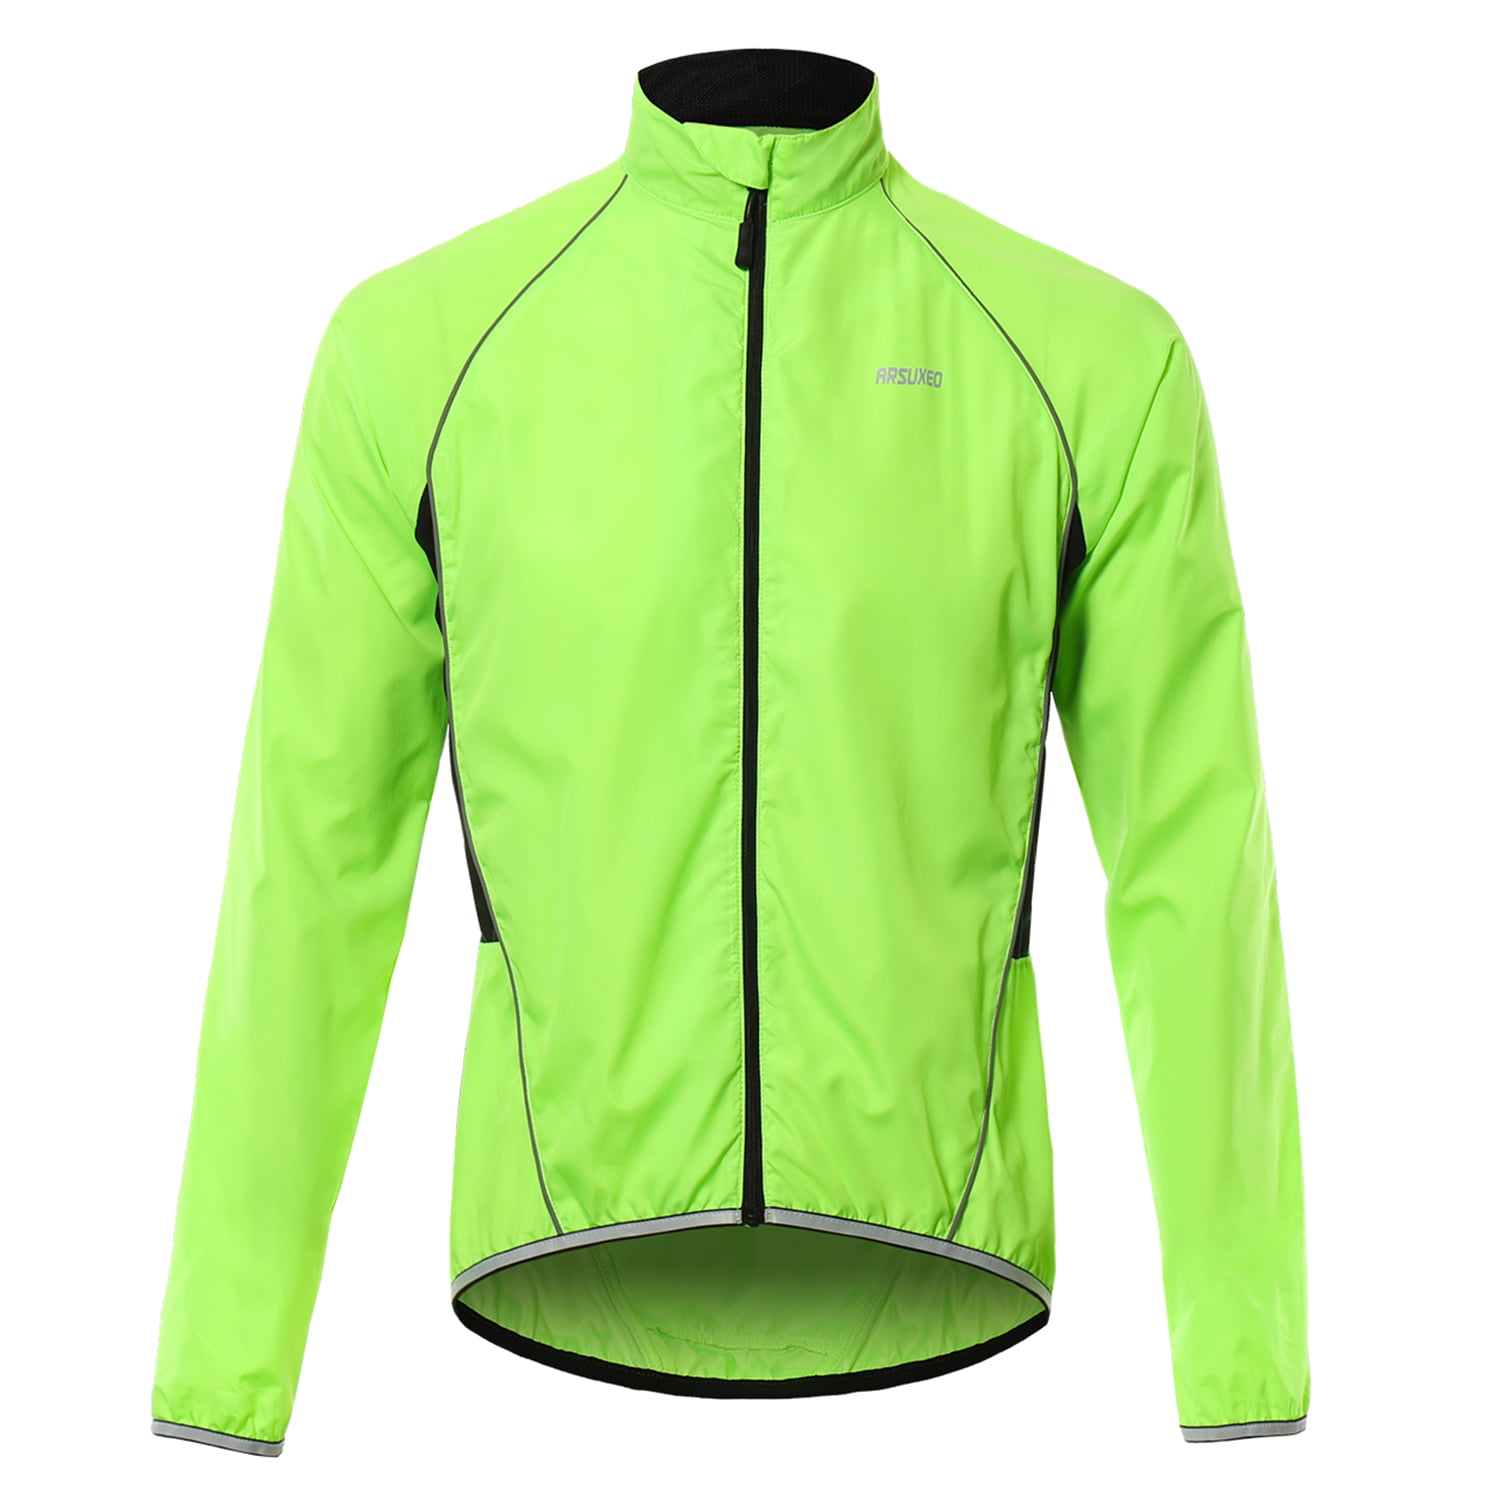 Cycling Vests Riding Bike Sleeveless Vest Wind Coat with Reflective Strap 